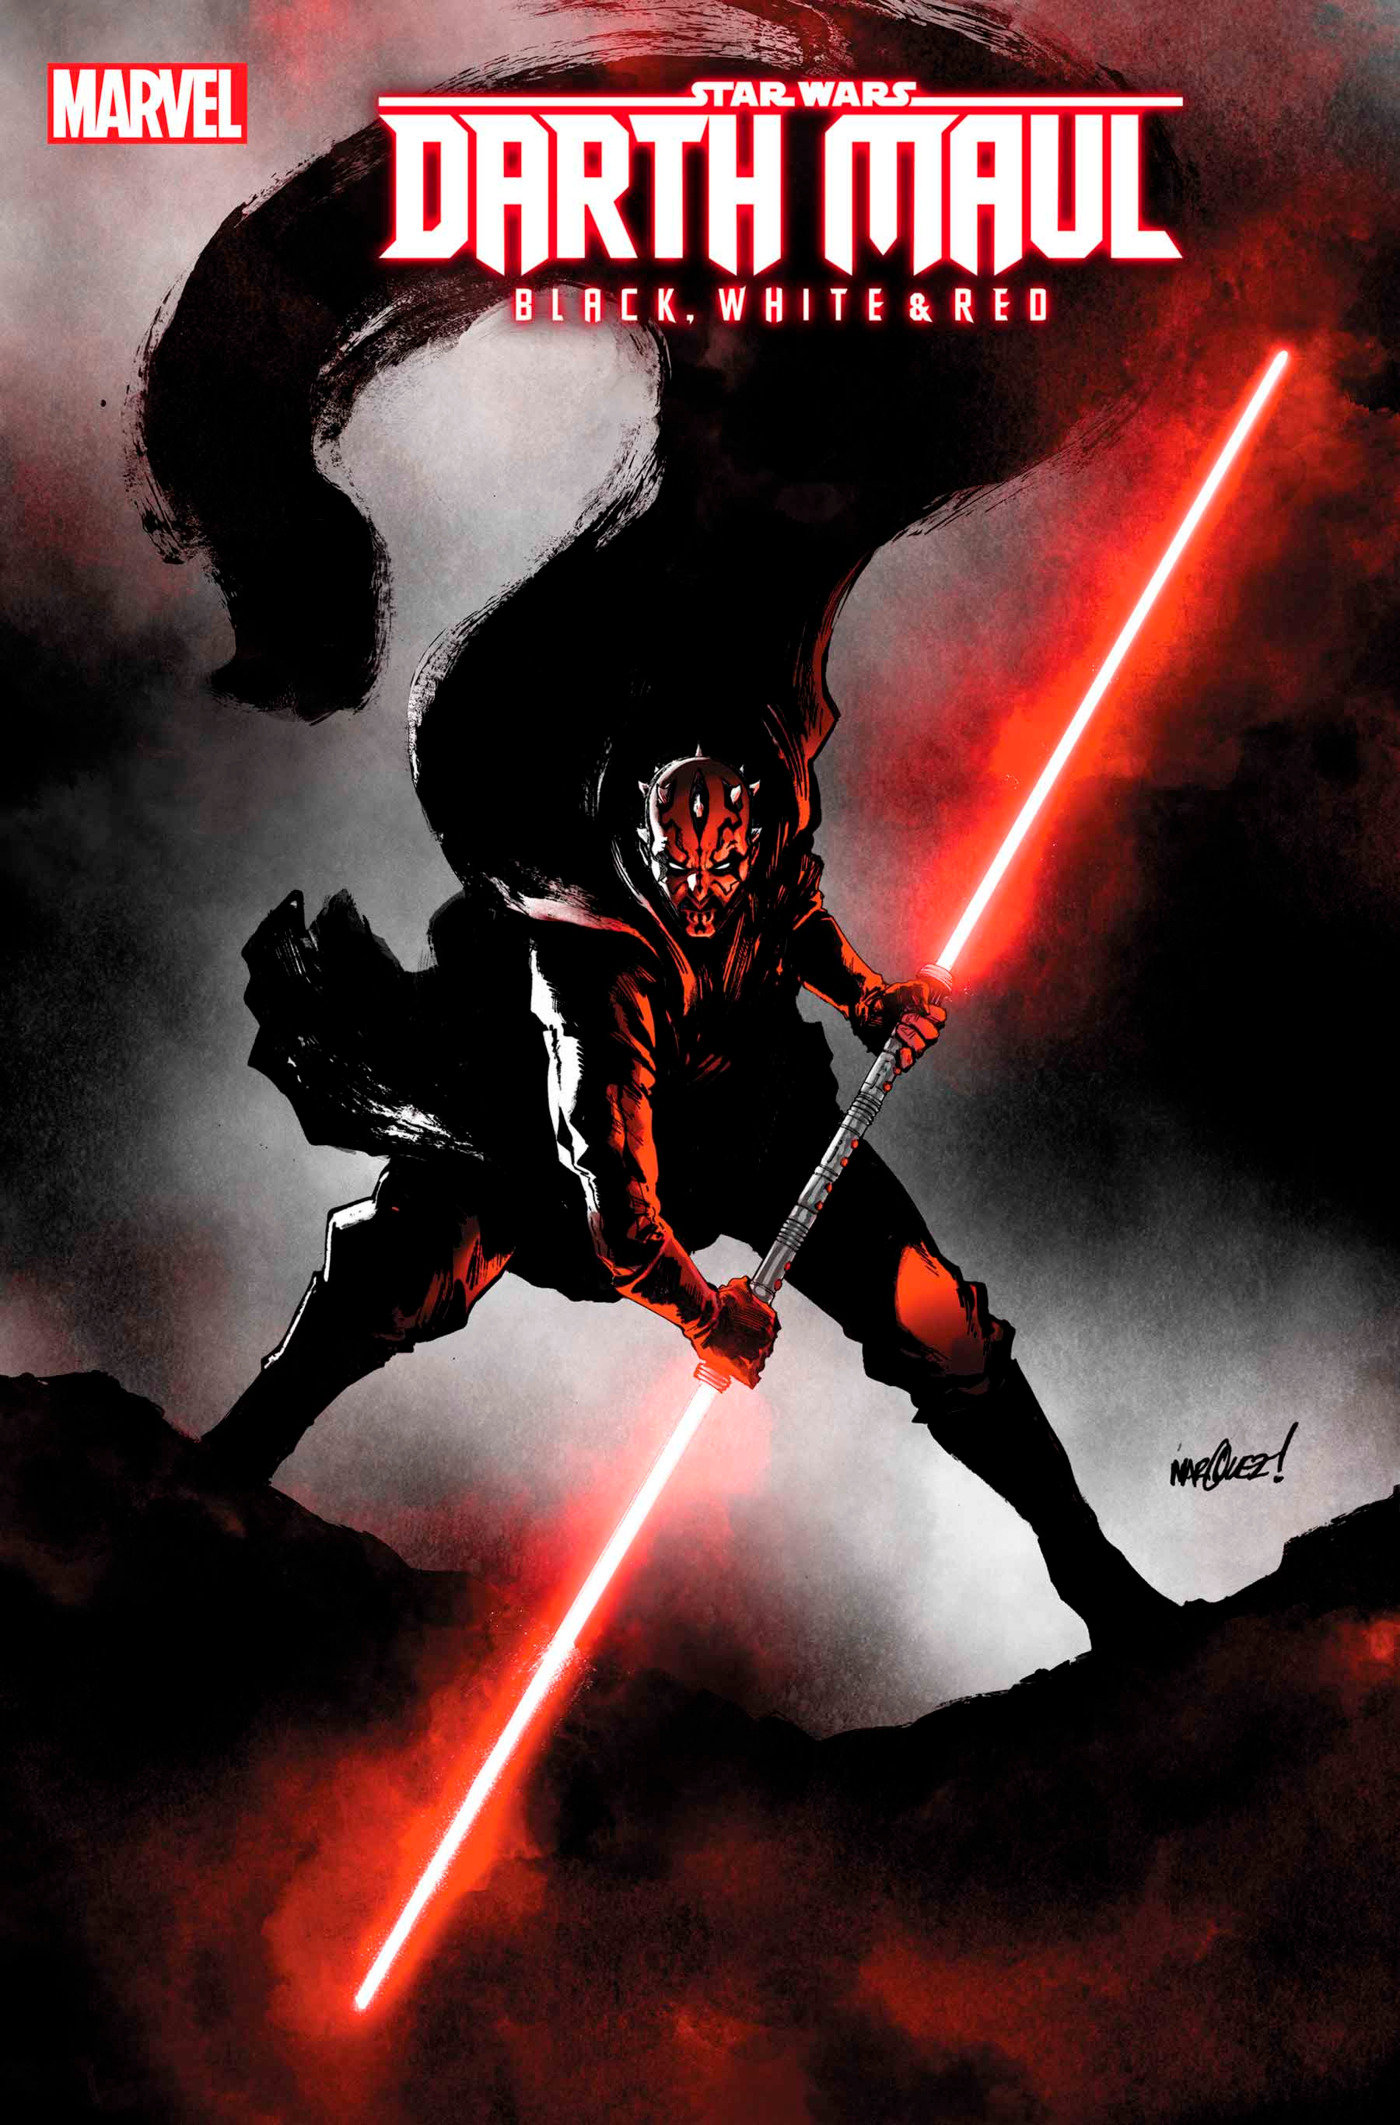 Star Wars Darth Maul - Black, White & Red #3 David Marquez Variant 1 for 25 Incentive